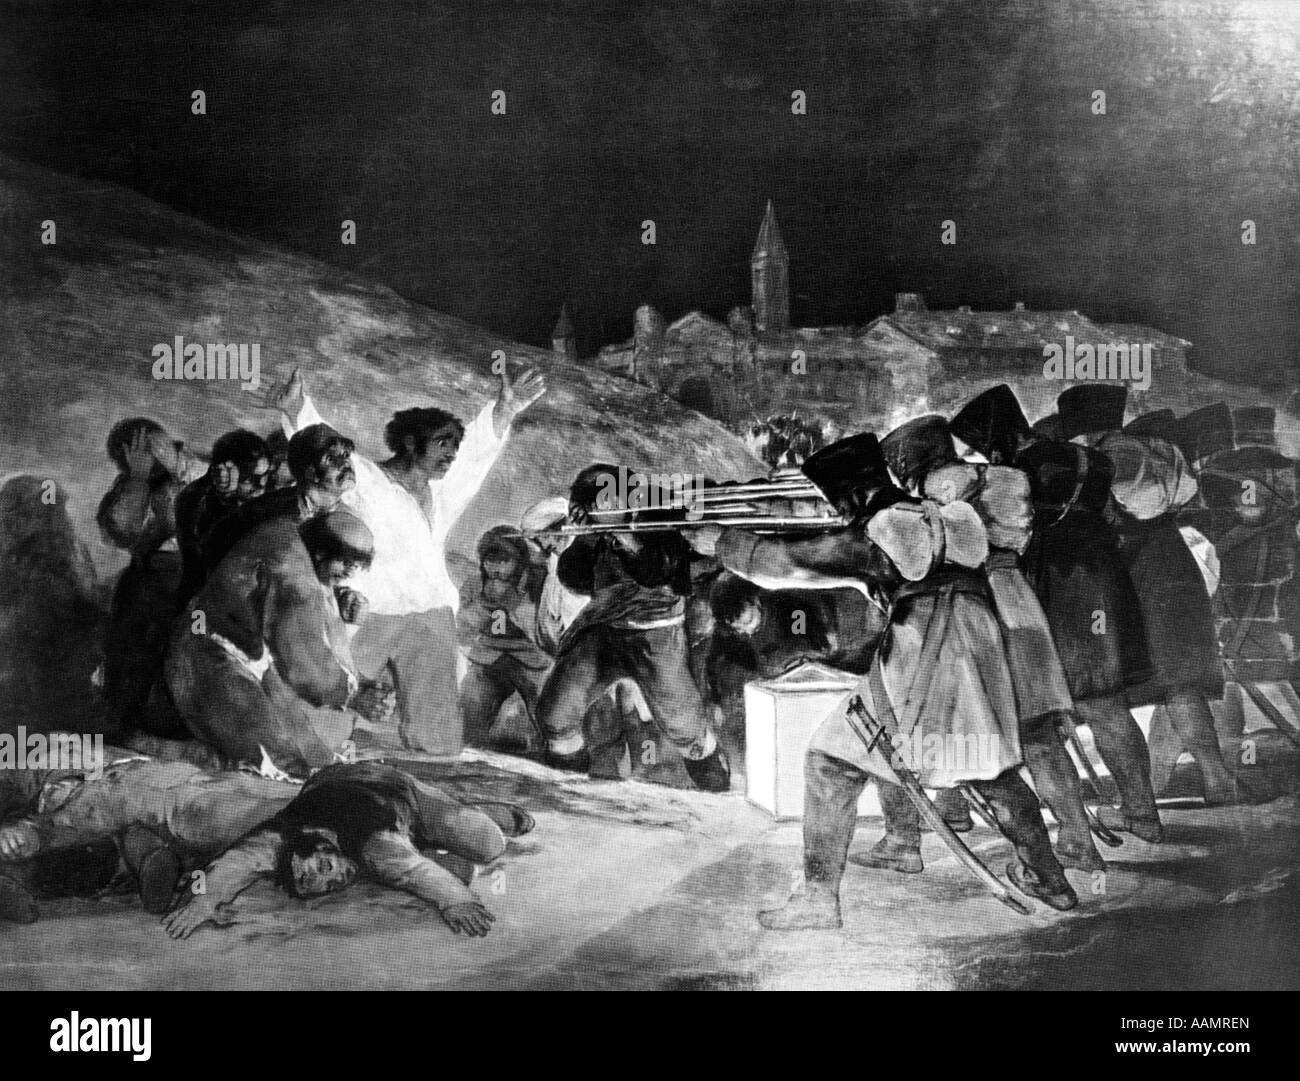 1808 THE FIRING PARTY GOYA PAINTING EXECUTIONS OF FRENCH SOLDIERS SHOOTING ACCUSED LEADERS REVOLT MADRID SPAIN NAPOLEONIC WAR Stock Photo